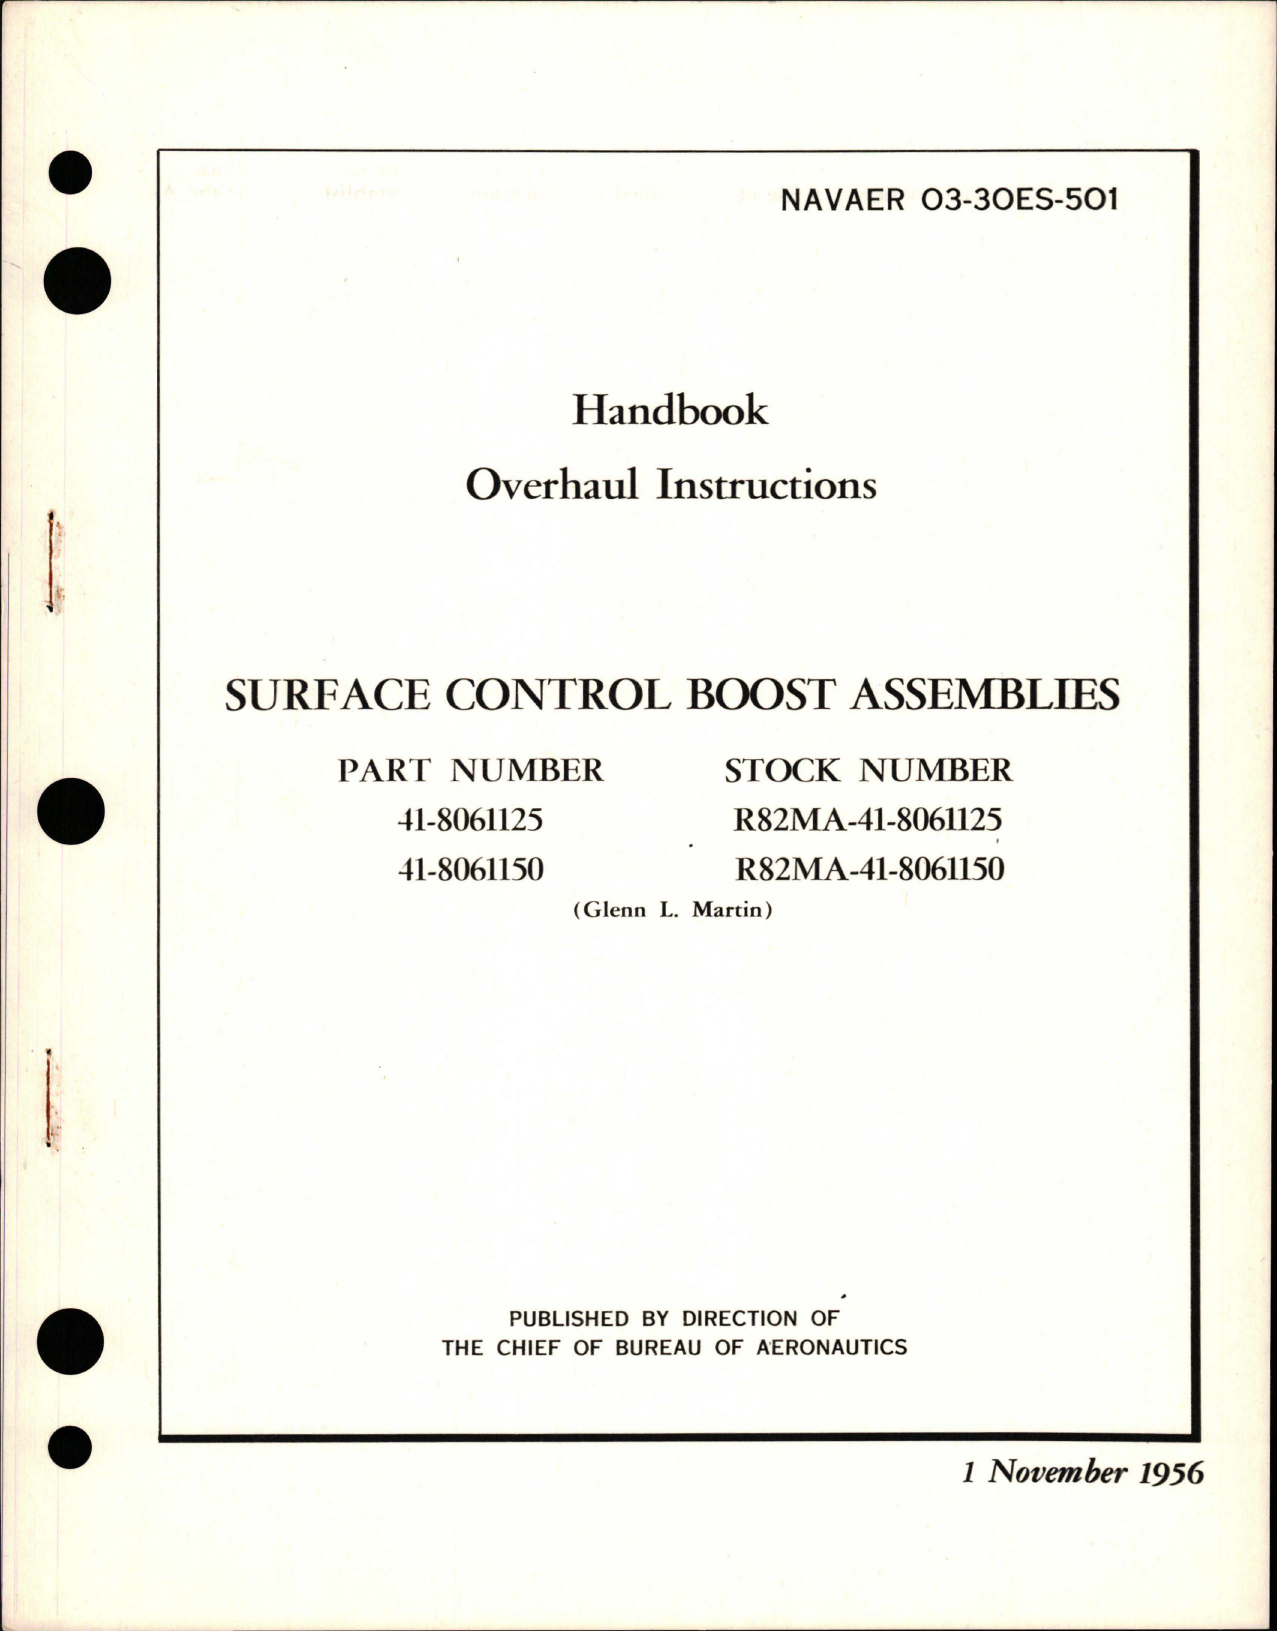 Sample page 1 from AirCorps Library document: Overhaul Instructions for Surface Control Boost Assembly - Parts 41-8061125 and 41-8061150